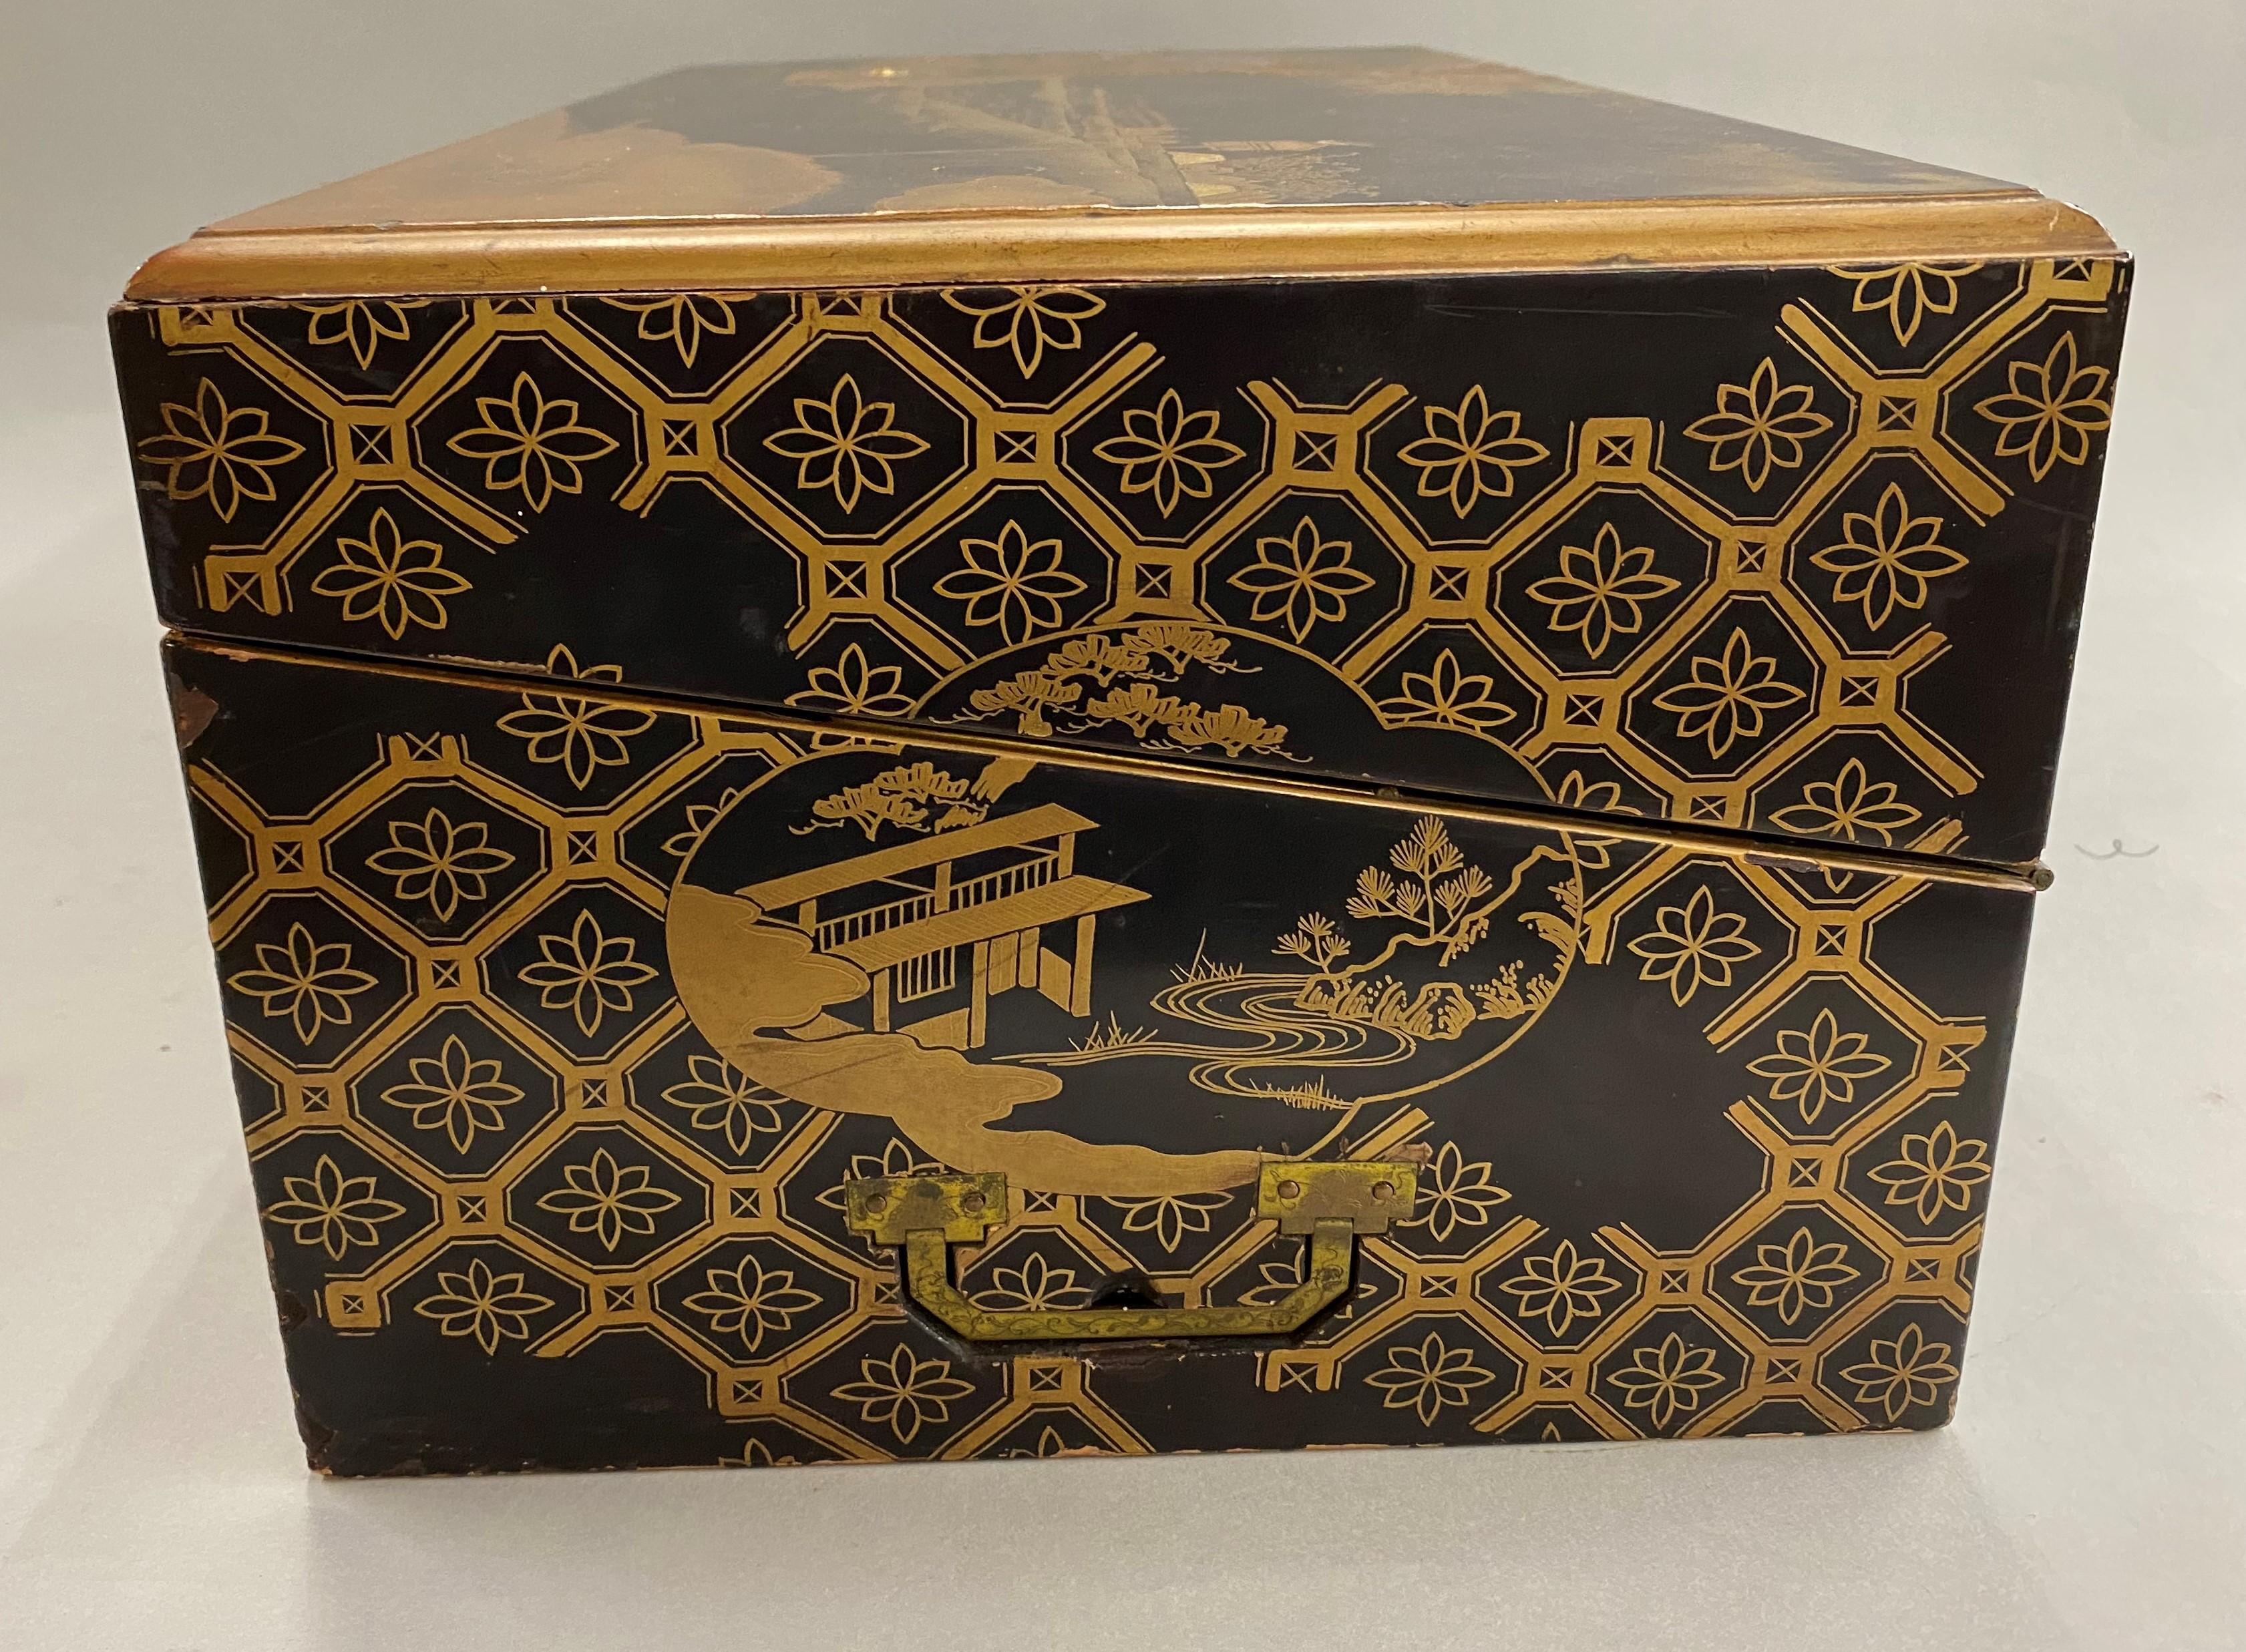 19th Century Japanese Meiji Period Carved and Gilt Lacquer Writing Box or Lap Desk